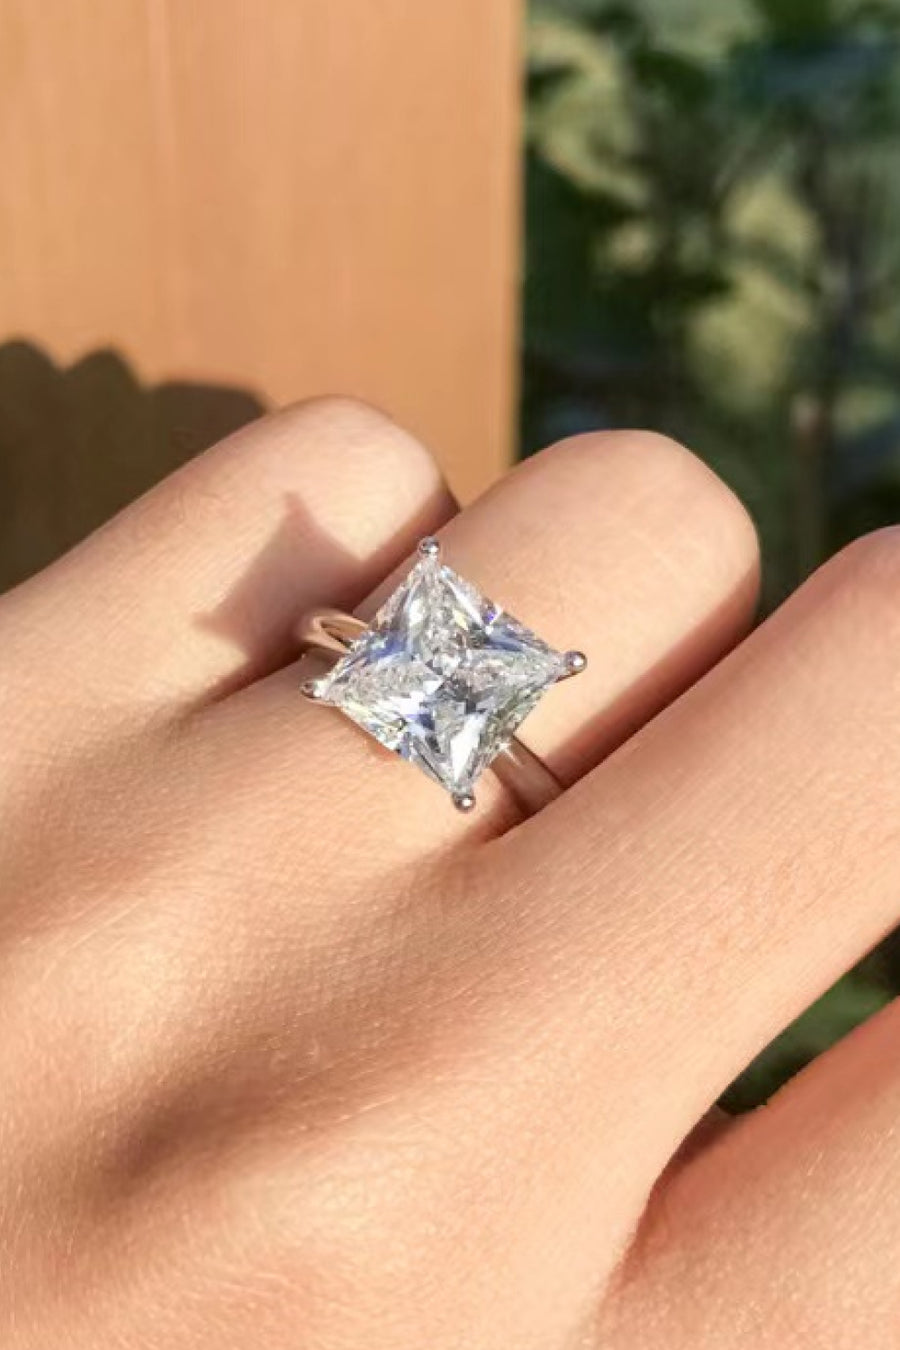 Moissanite solitaire ring, Lab-created gemstone, 5-carat statement piece, Sparkling centerpiece, Timeless elegance, Luxury jewelry, Classic design, High-quality craftsmanship, Affordable glamour, Fine jewelry accessory.